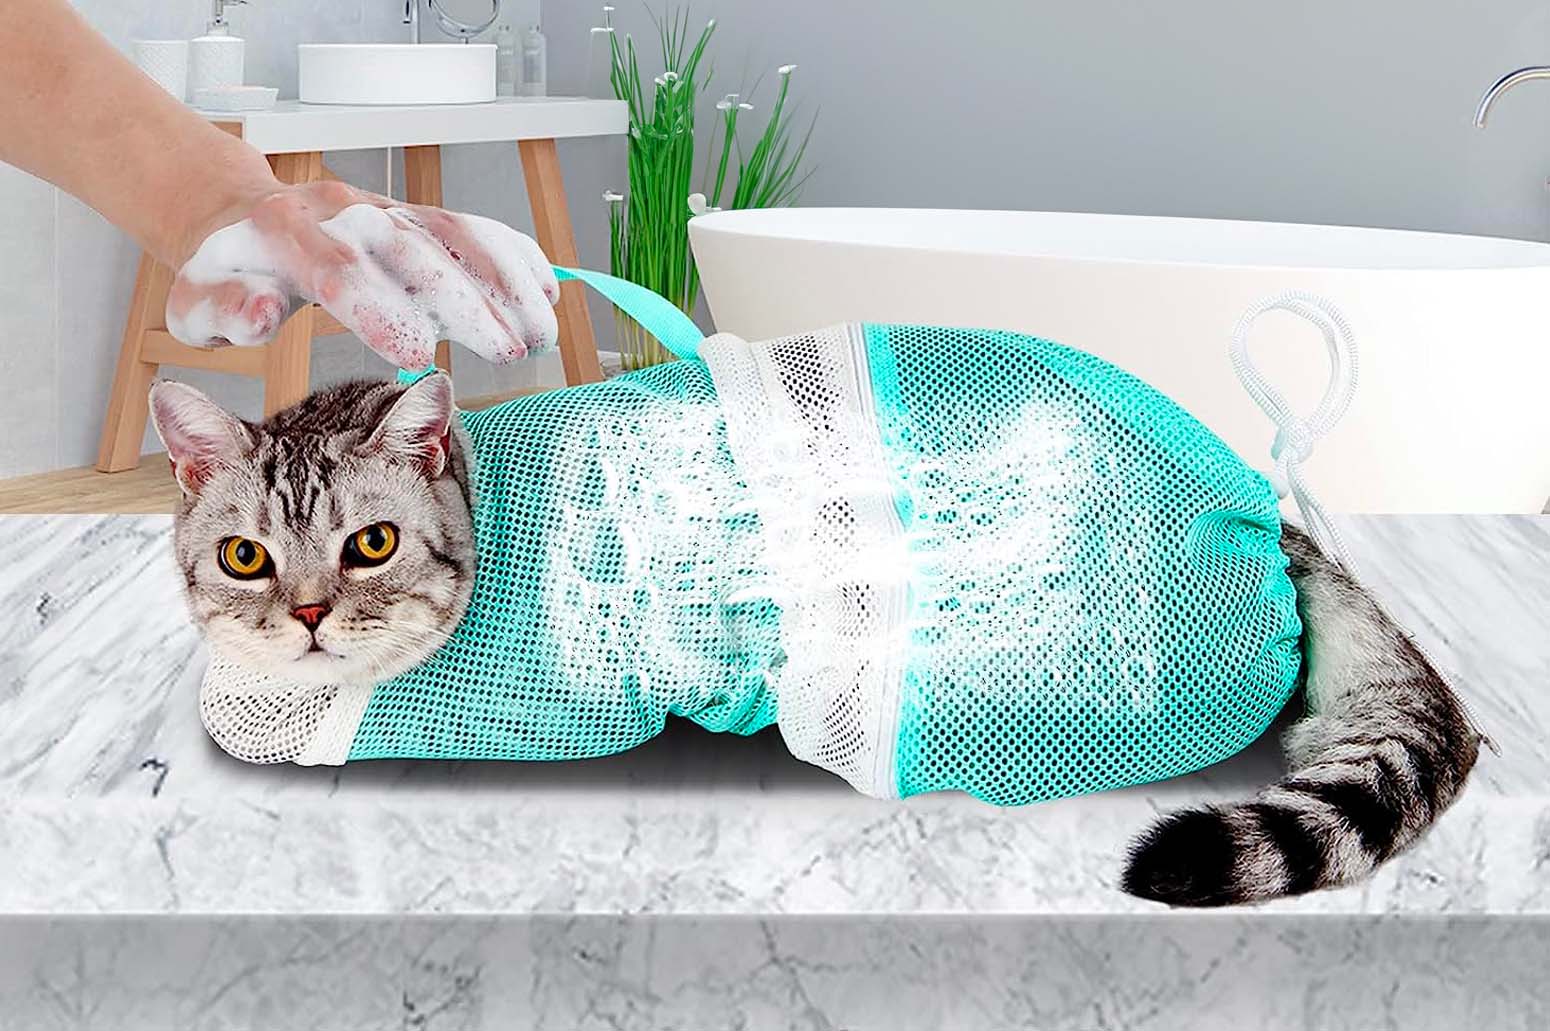 Anti-Scratch Restraint Cat Grooming Bag for Shower, Nail Trimming